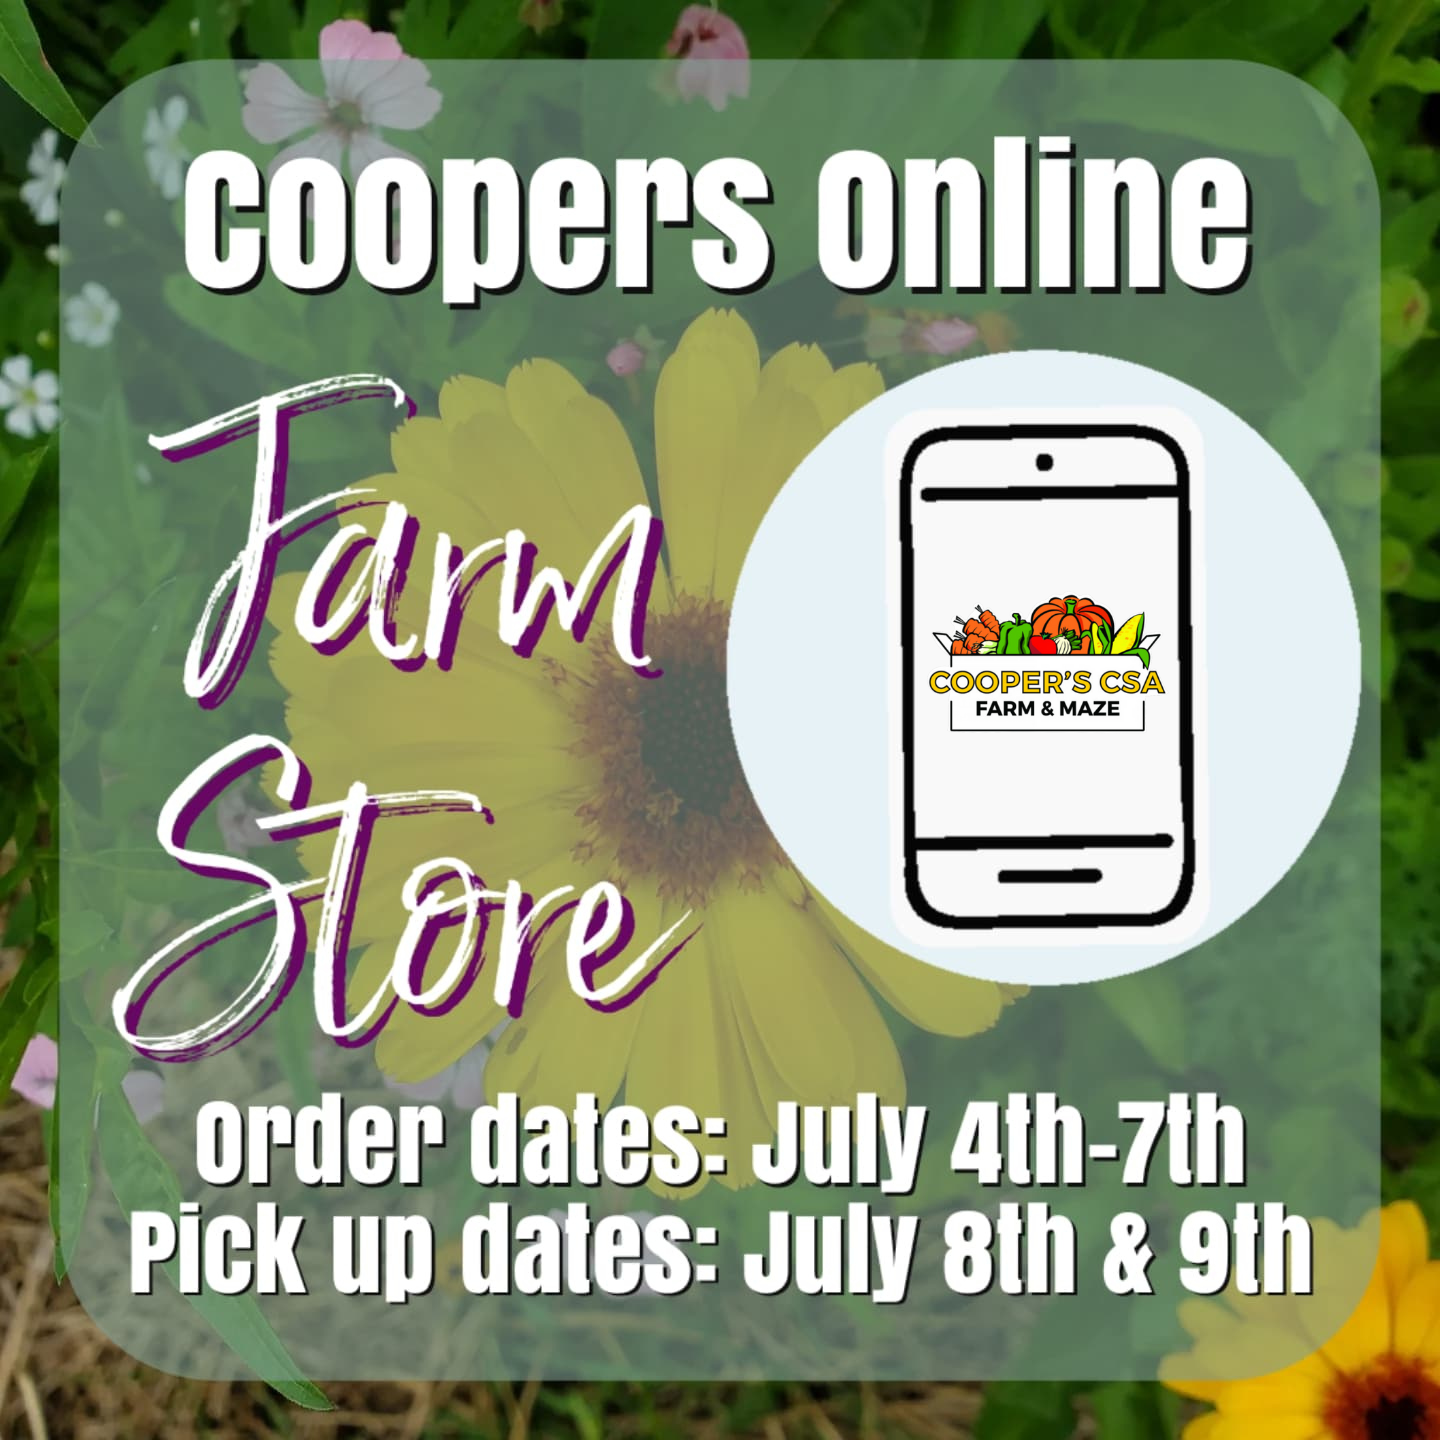 Next Happening: Coopers Online Farm Stand- July 4th-9th